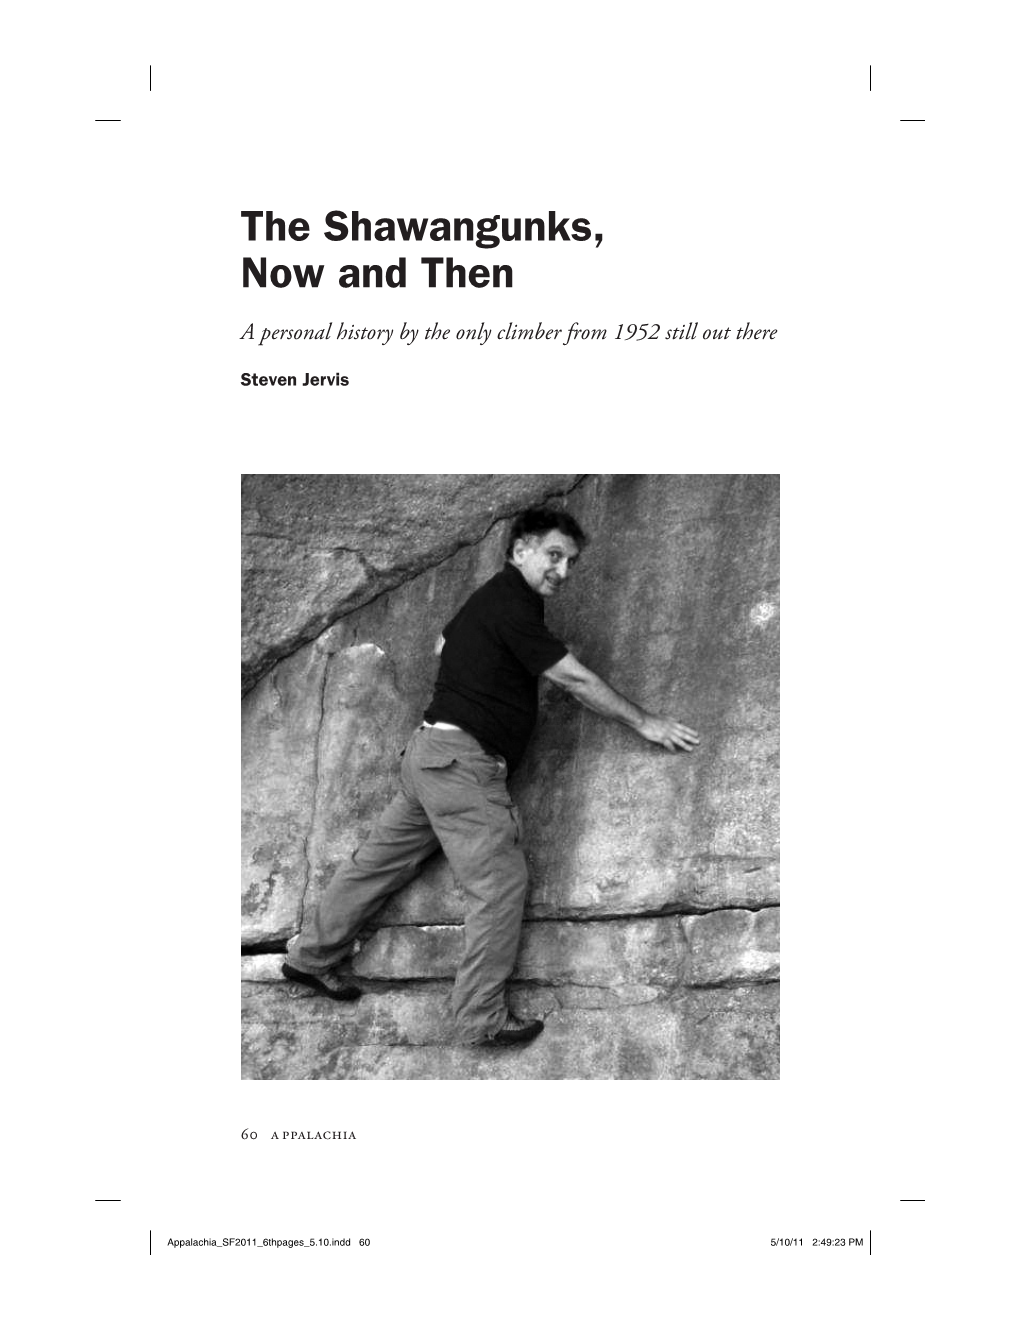 The Shawangunks, Now and Then